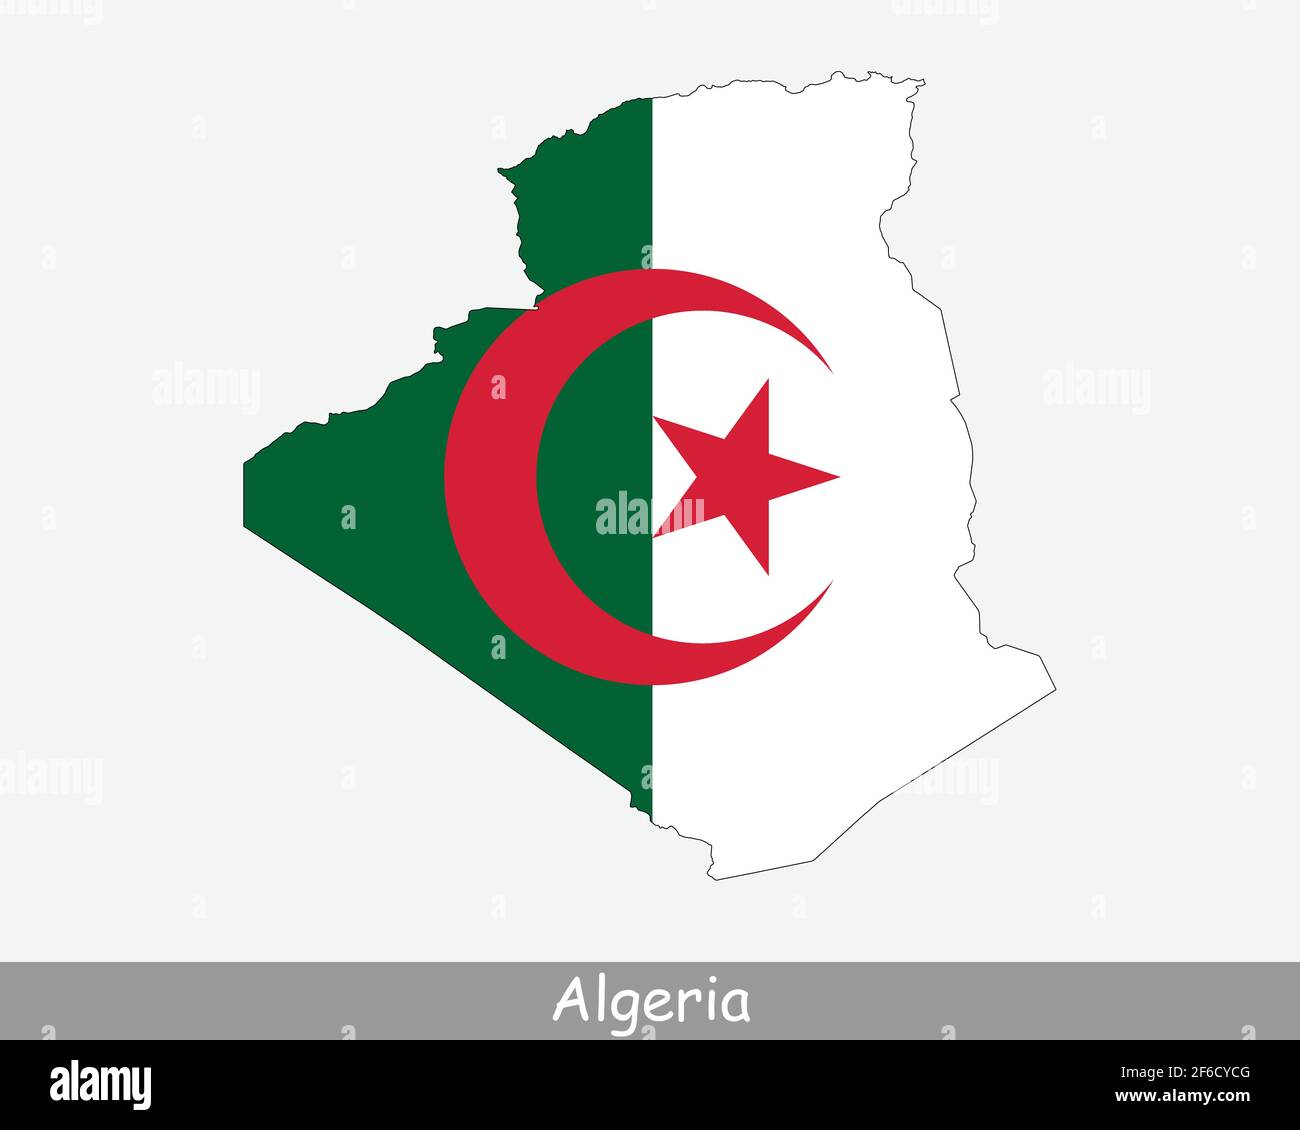 Algerian Map Flag. Map of Algeria with the national flag of Algeria isolated on white background. Vector illustration. Stock Vector